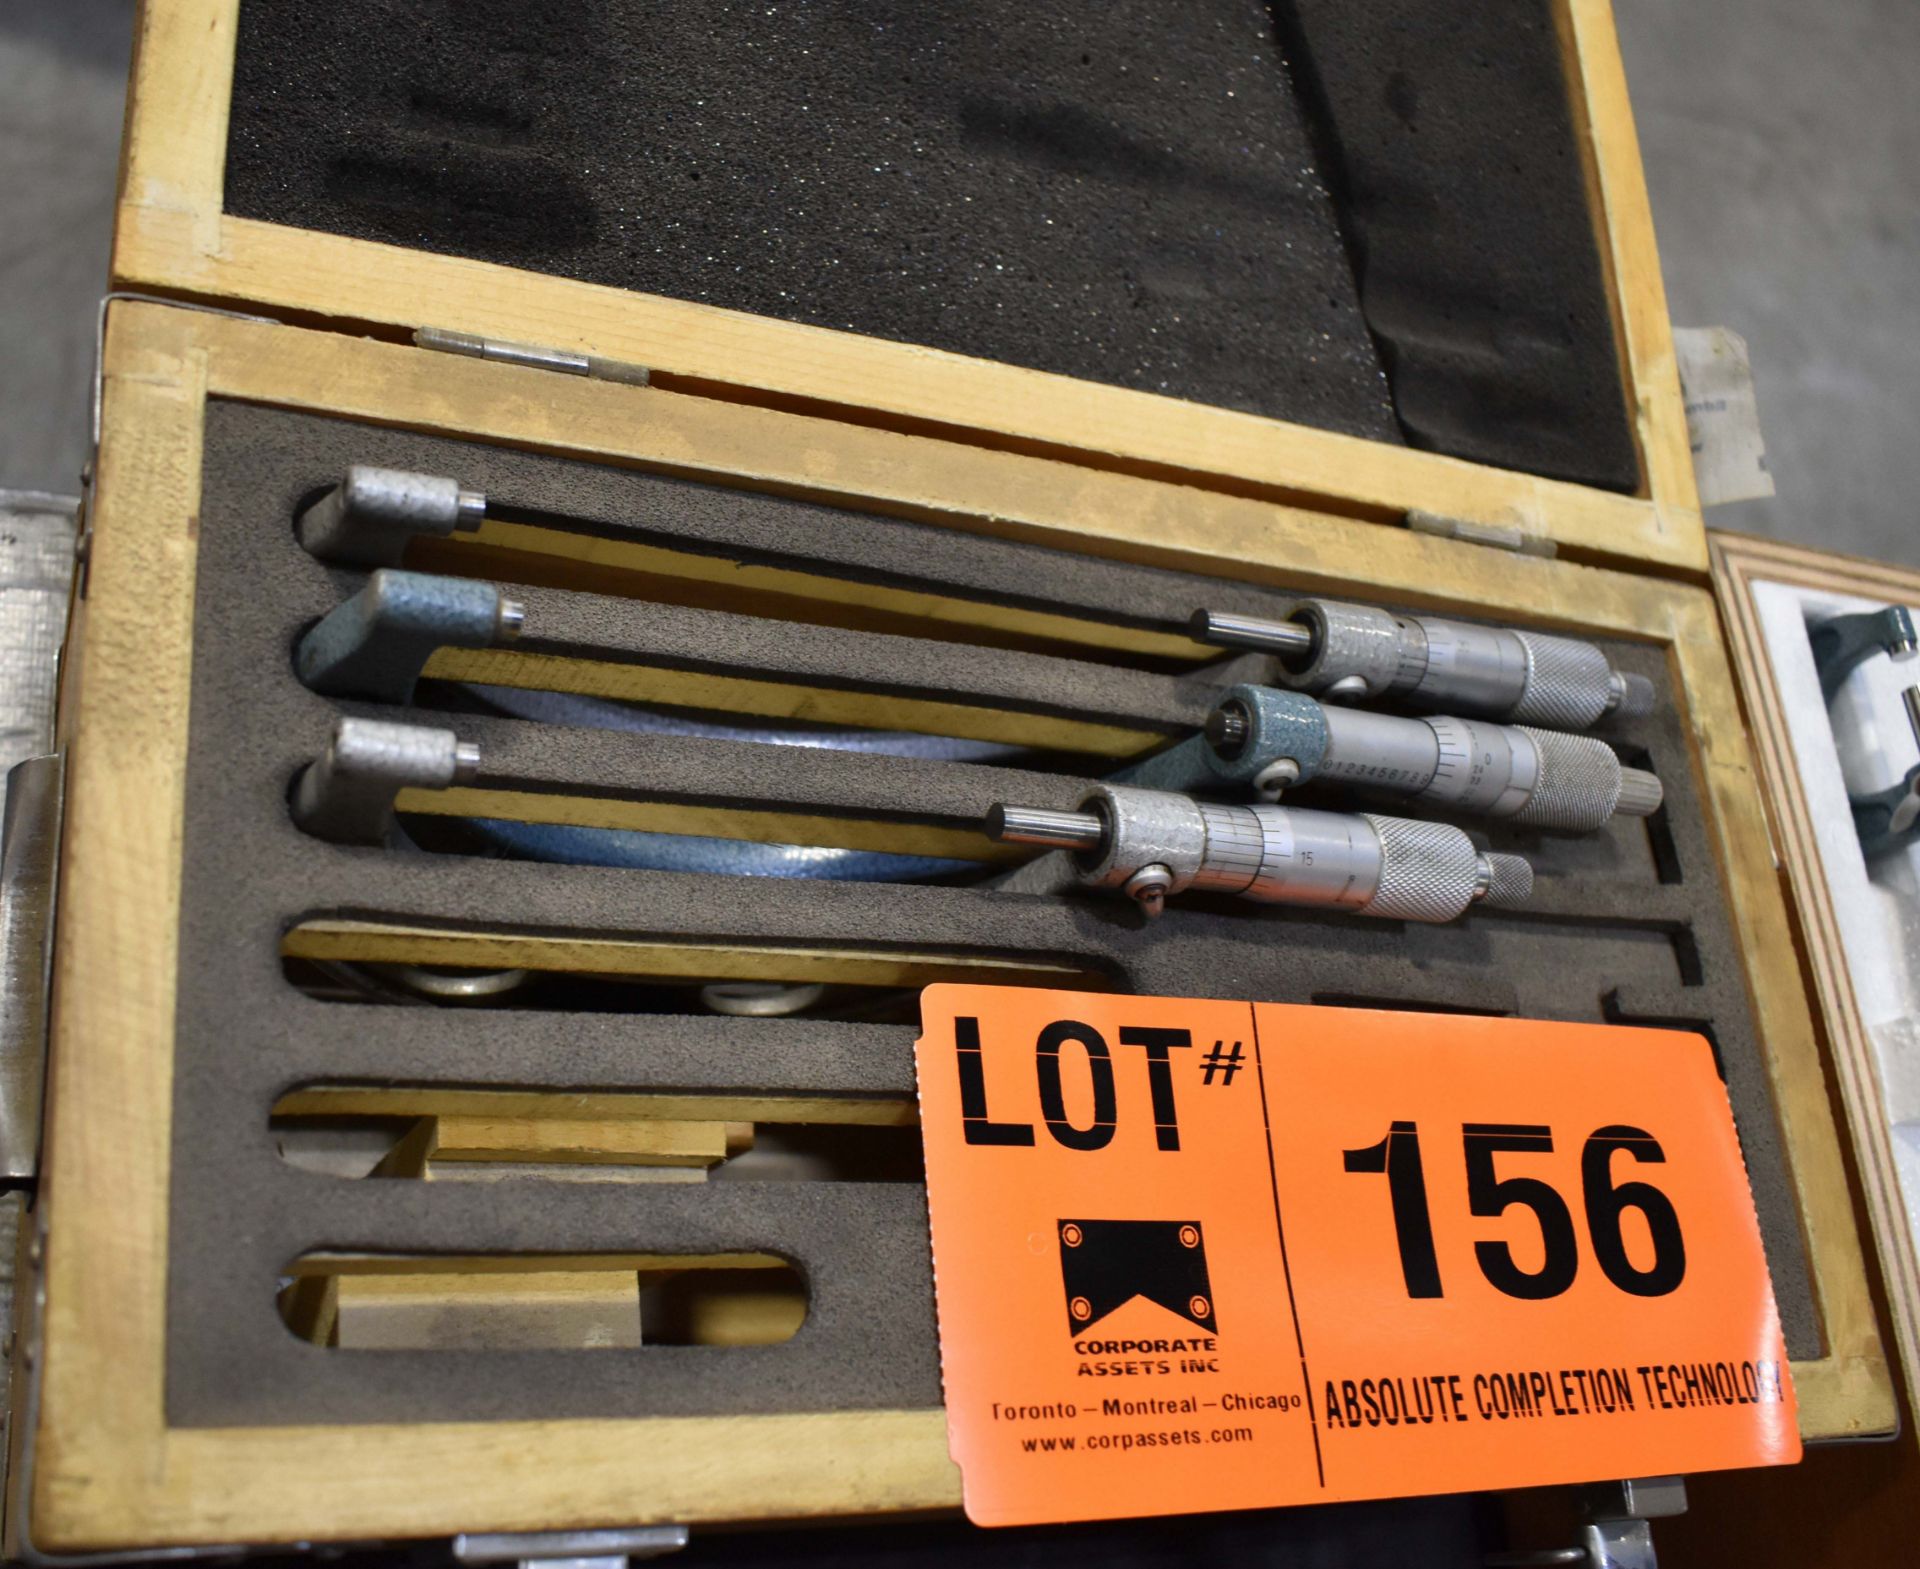 LOT/ PARTIAL OUTSIDE MICROMETER SETS [RIGGING FEES FOR LOT #156 - $10 USD PLUS APPLICABLE TAXES] - Image 2 of 3